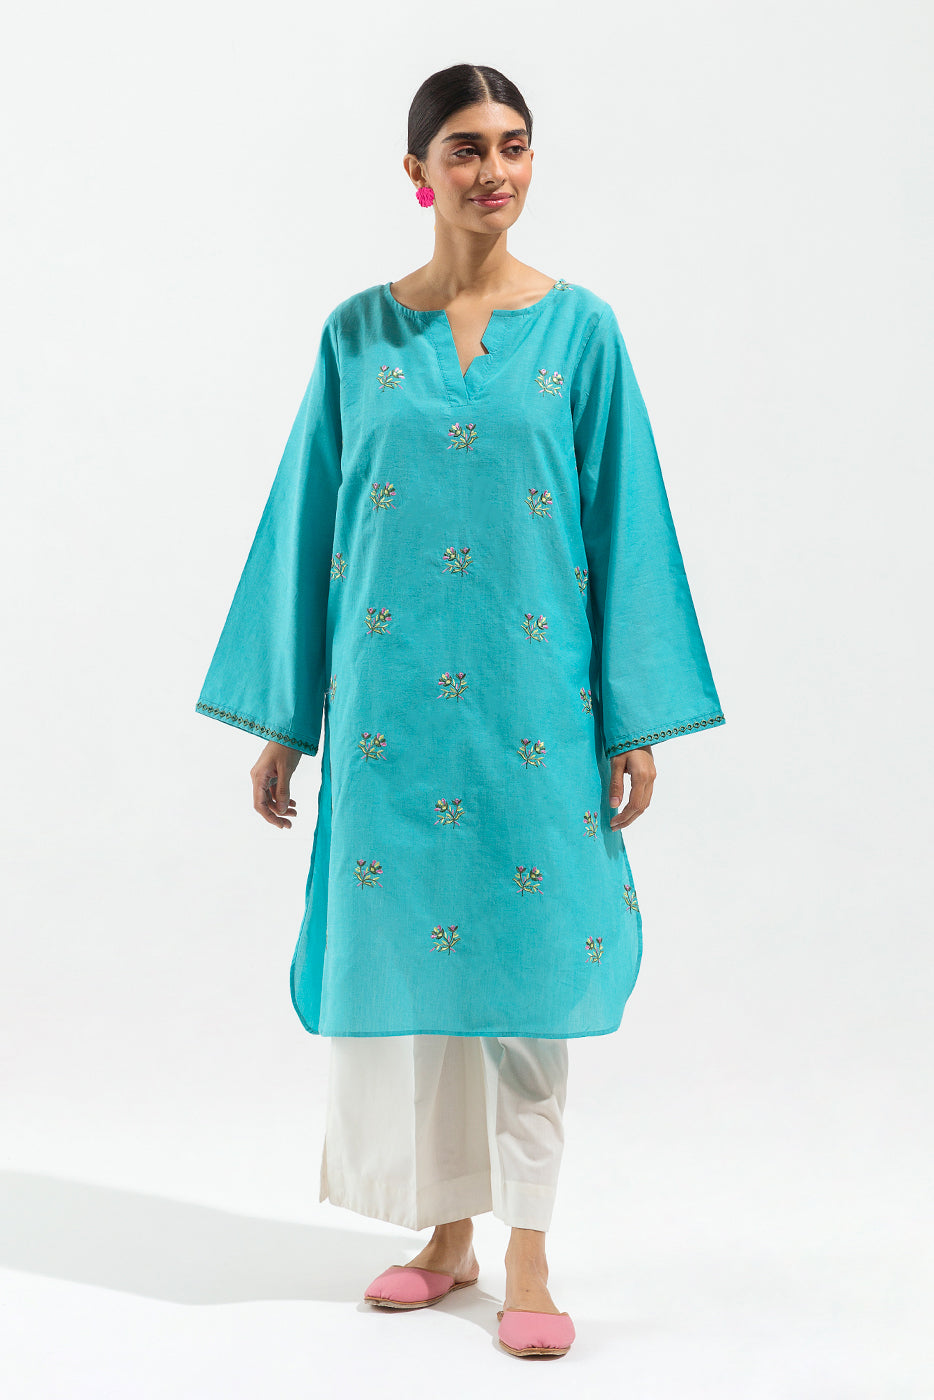 EMBROIDERED CHAMBRAY SHIRT (PRET) - BEECHTREE